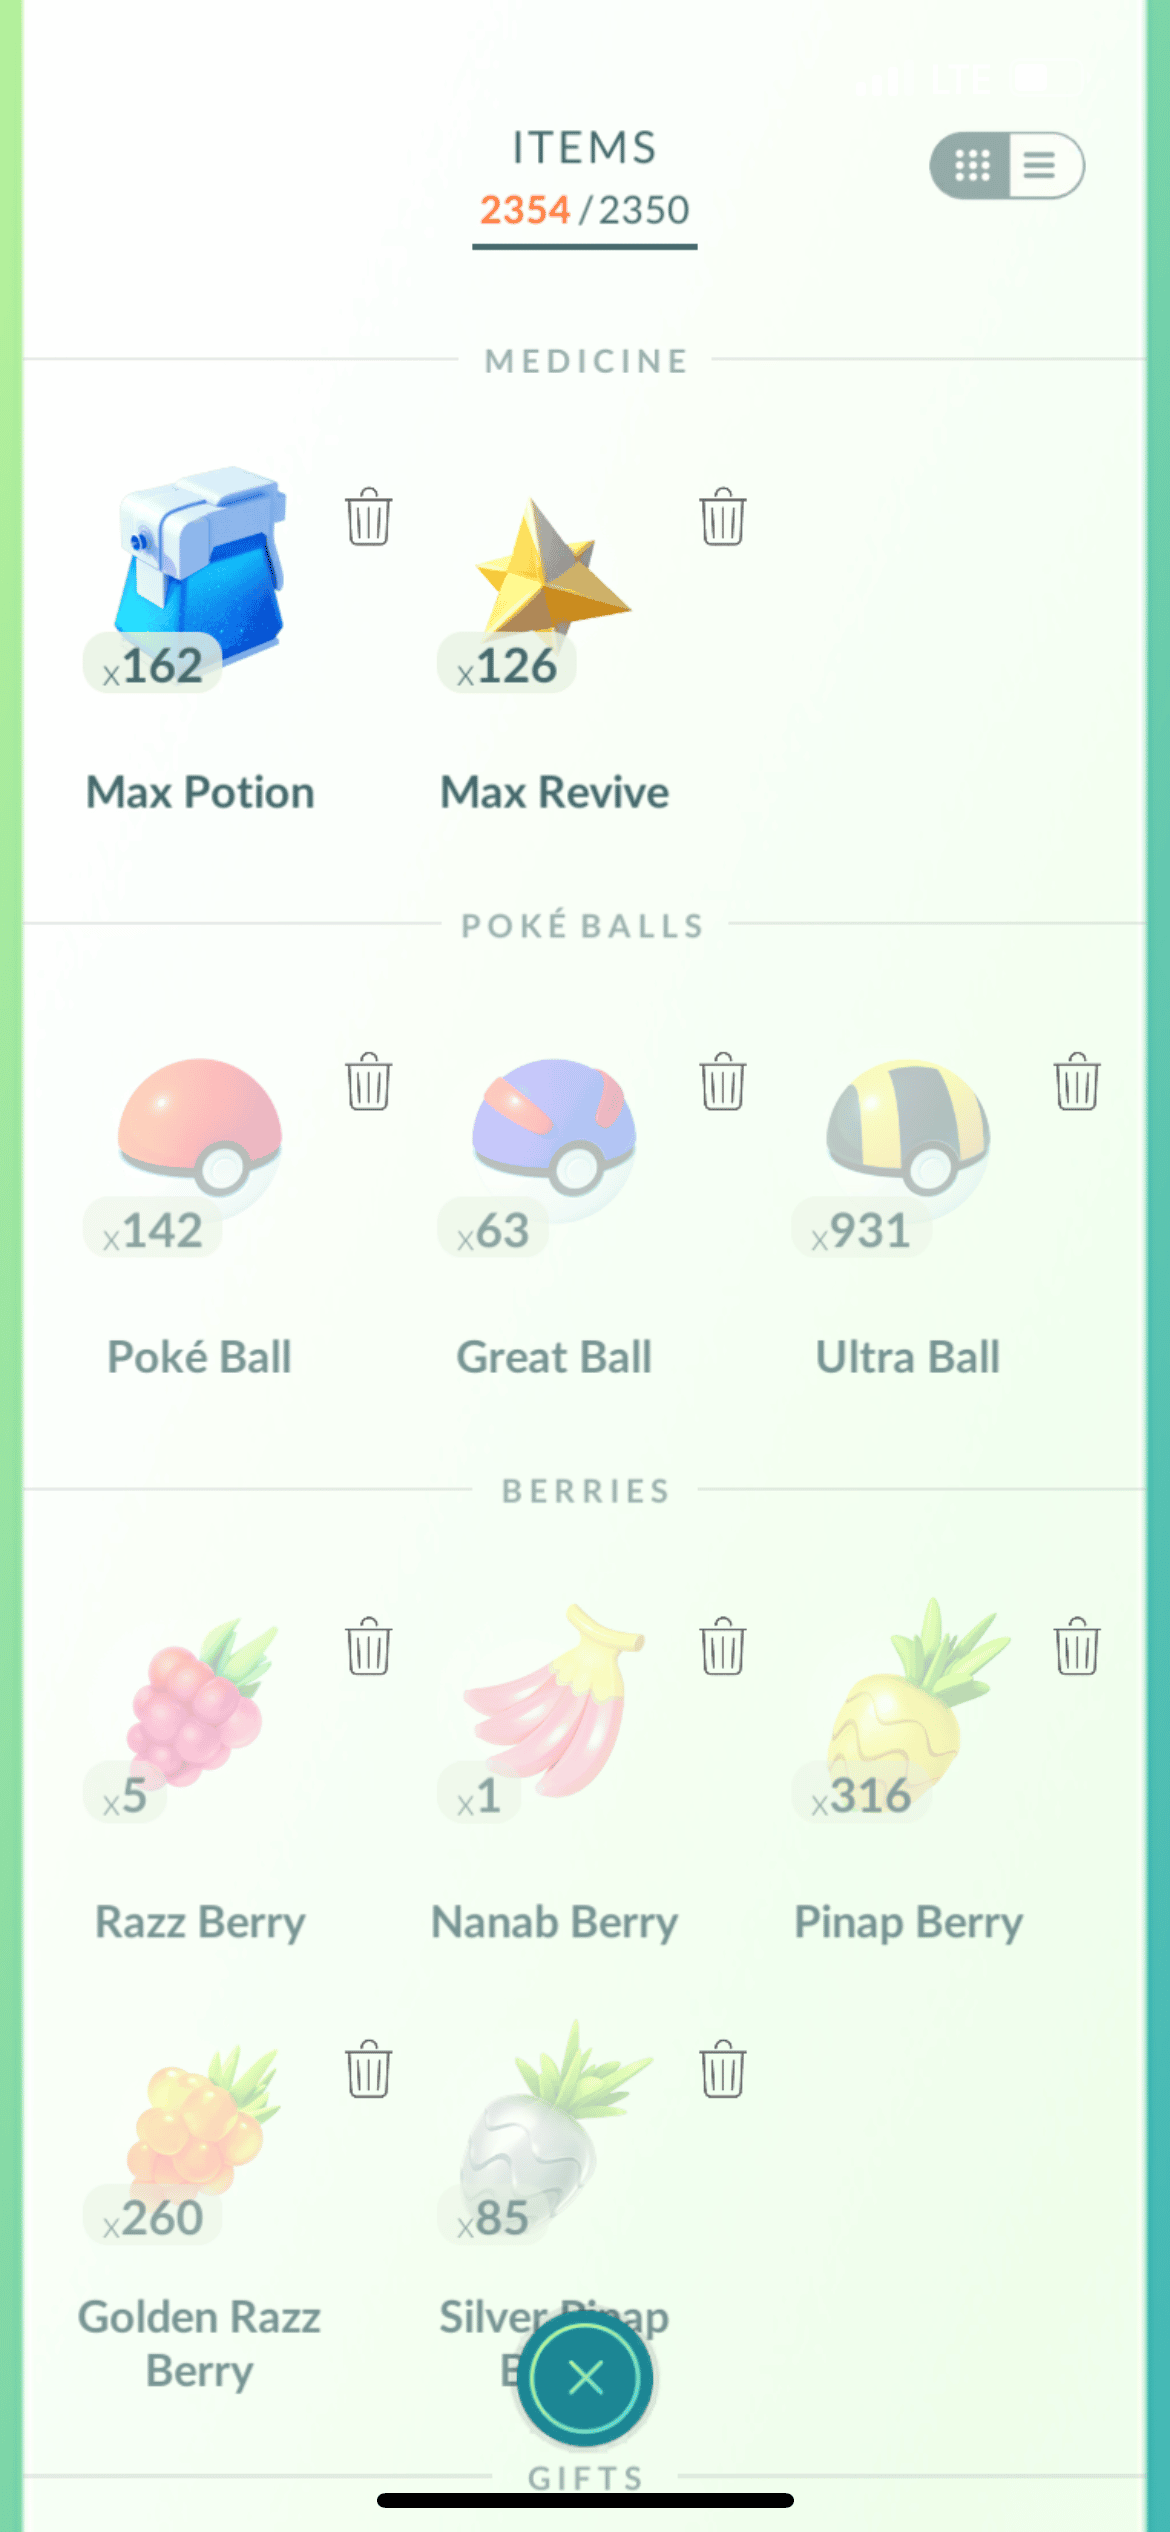 Pokémon GO updates item inventory UI and increases storage space